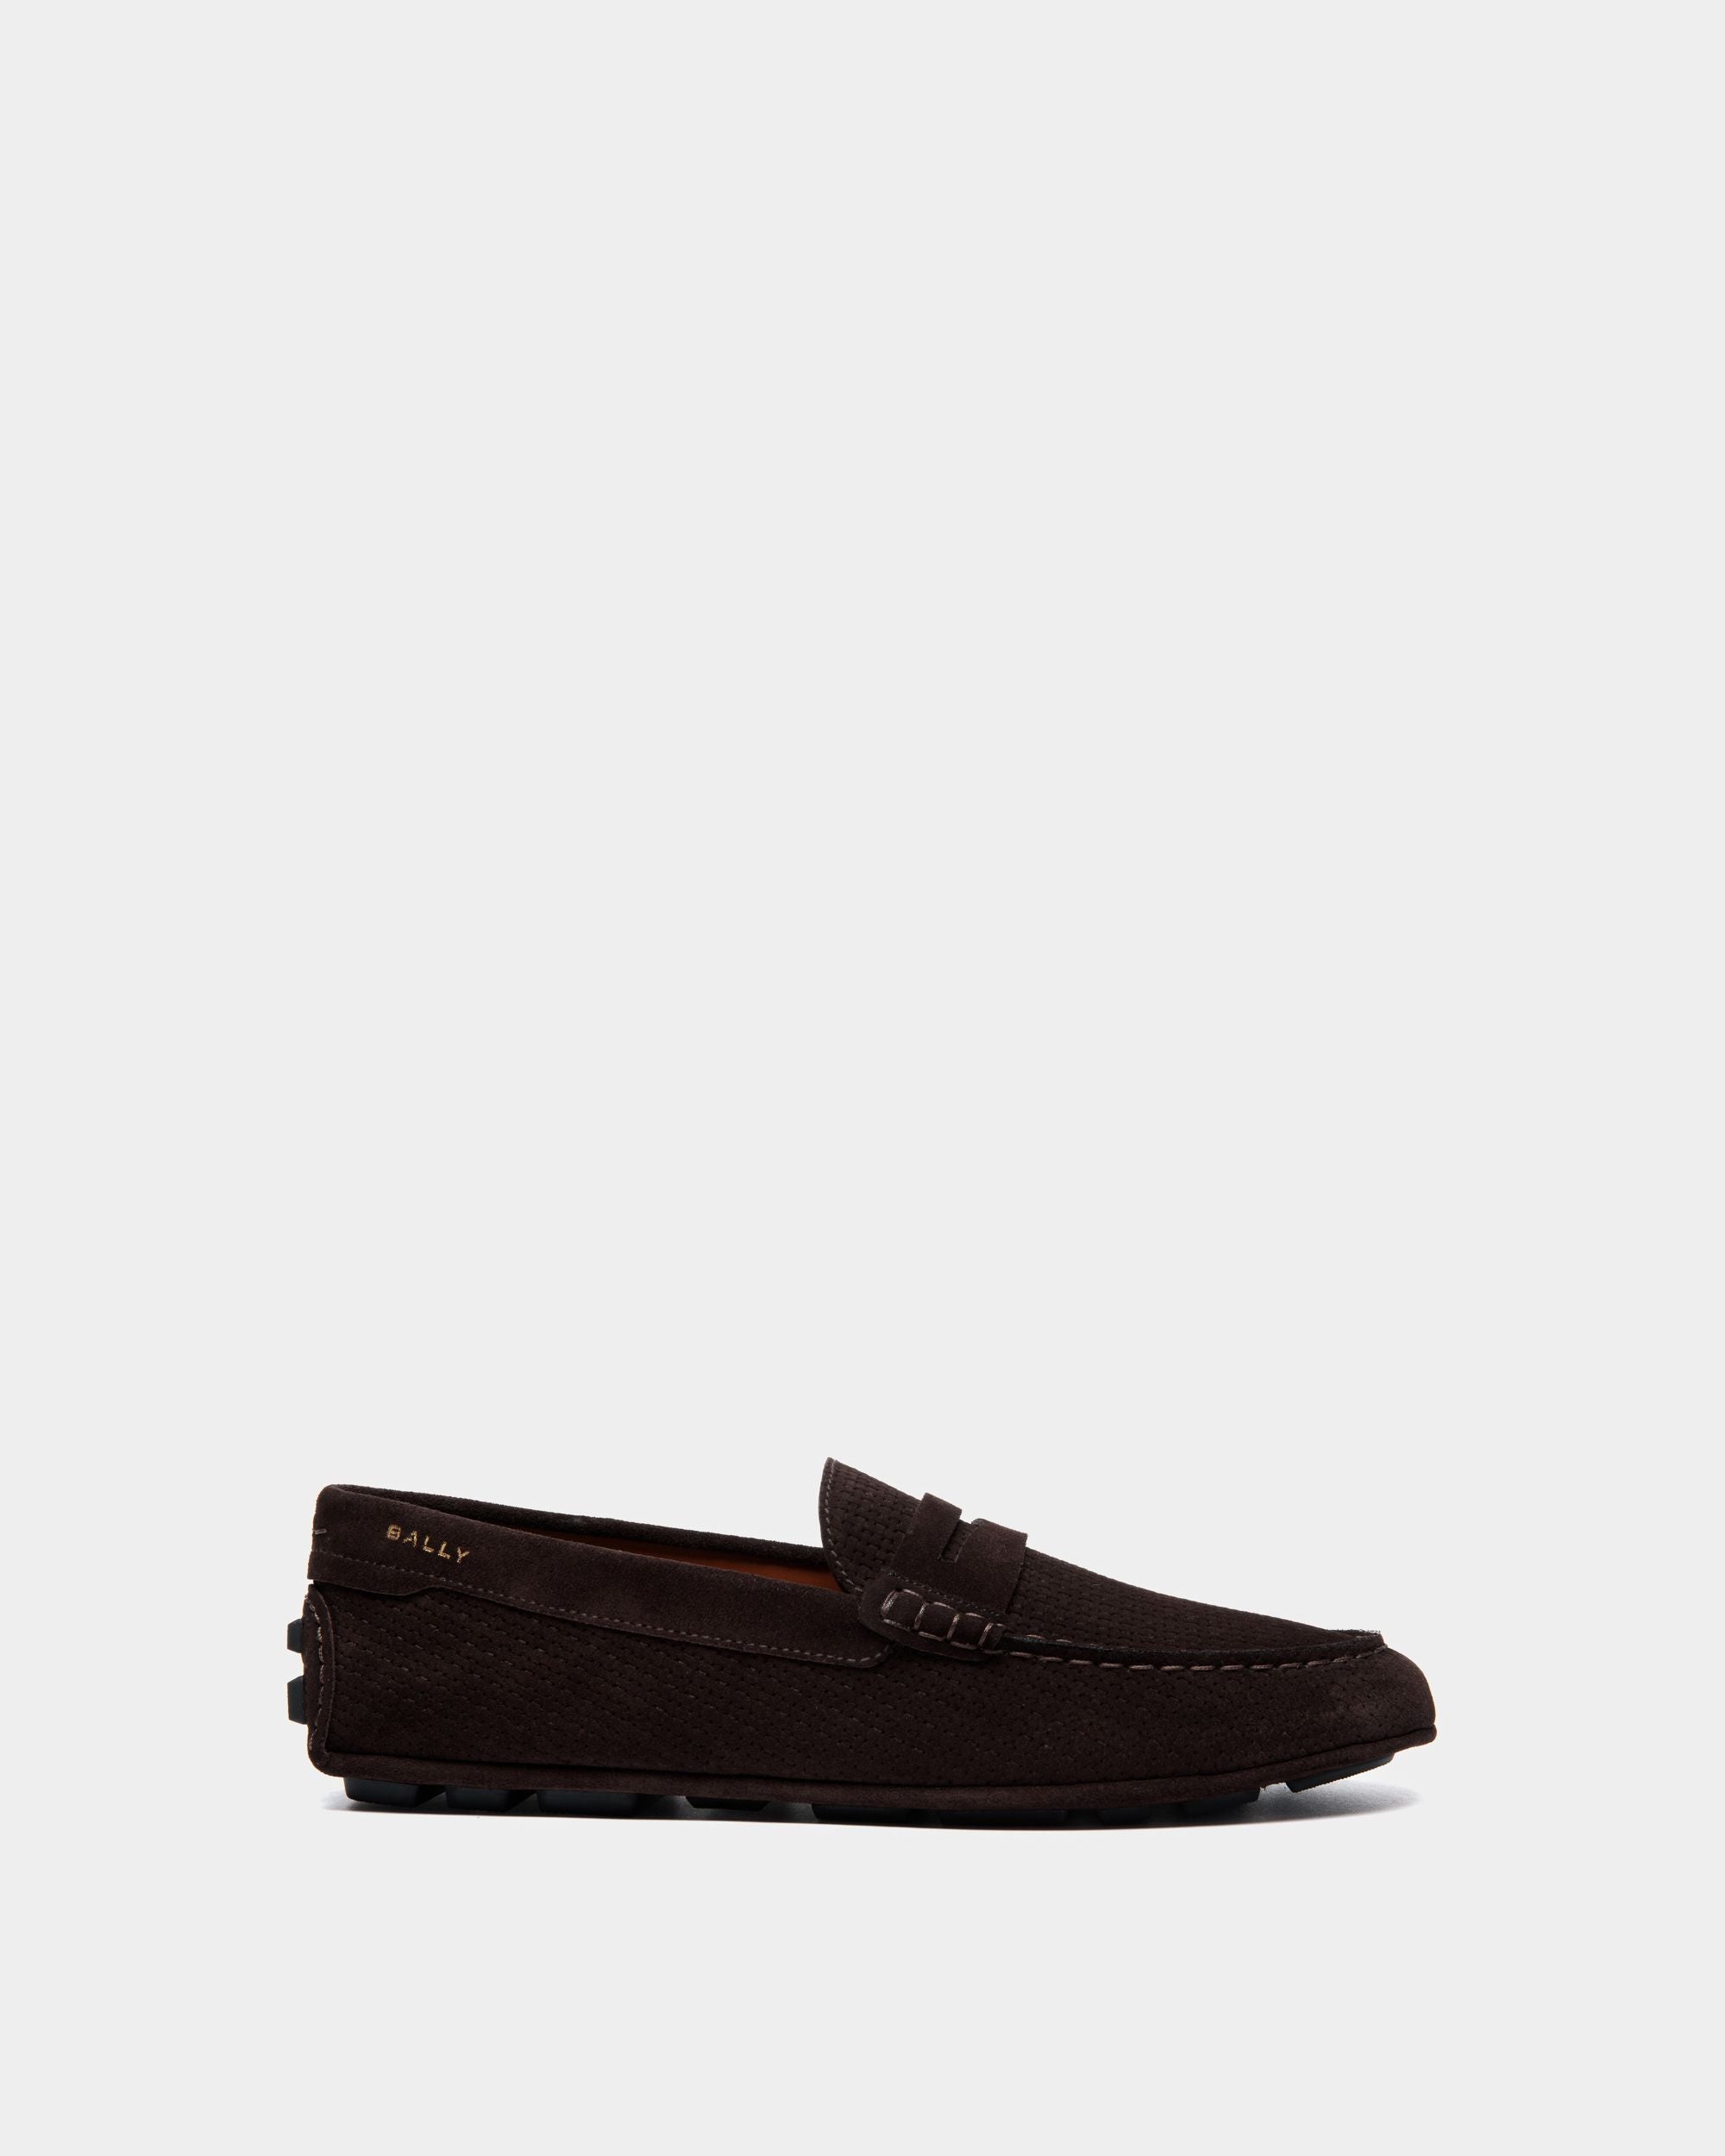 Kerbs | Men's Driver in Brown Embossed Suede| Bally | Still Life Side